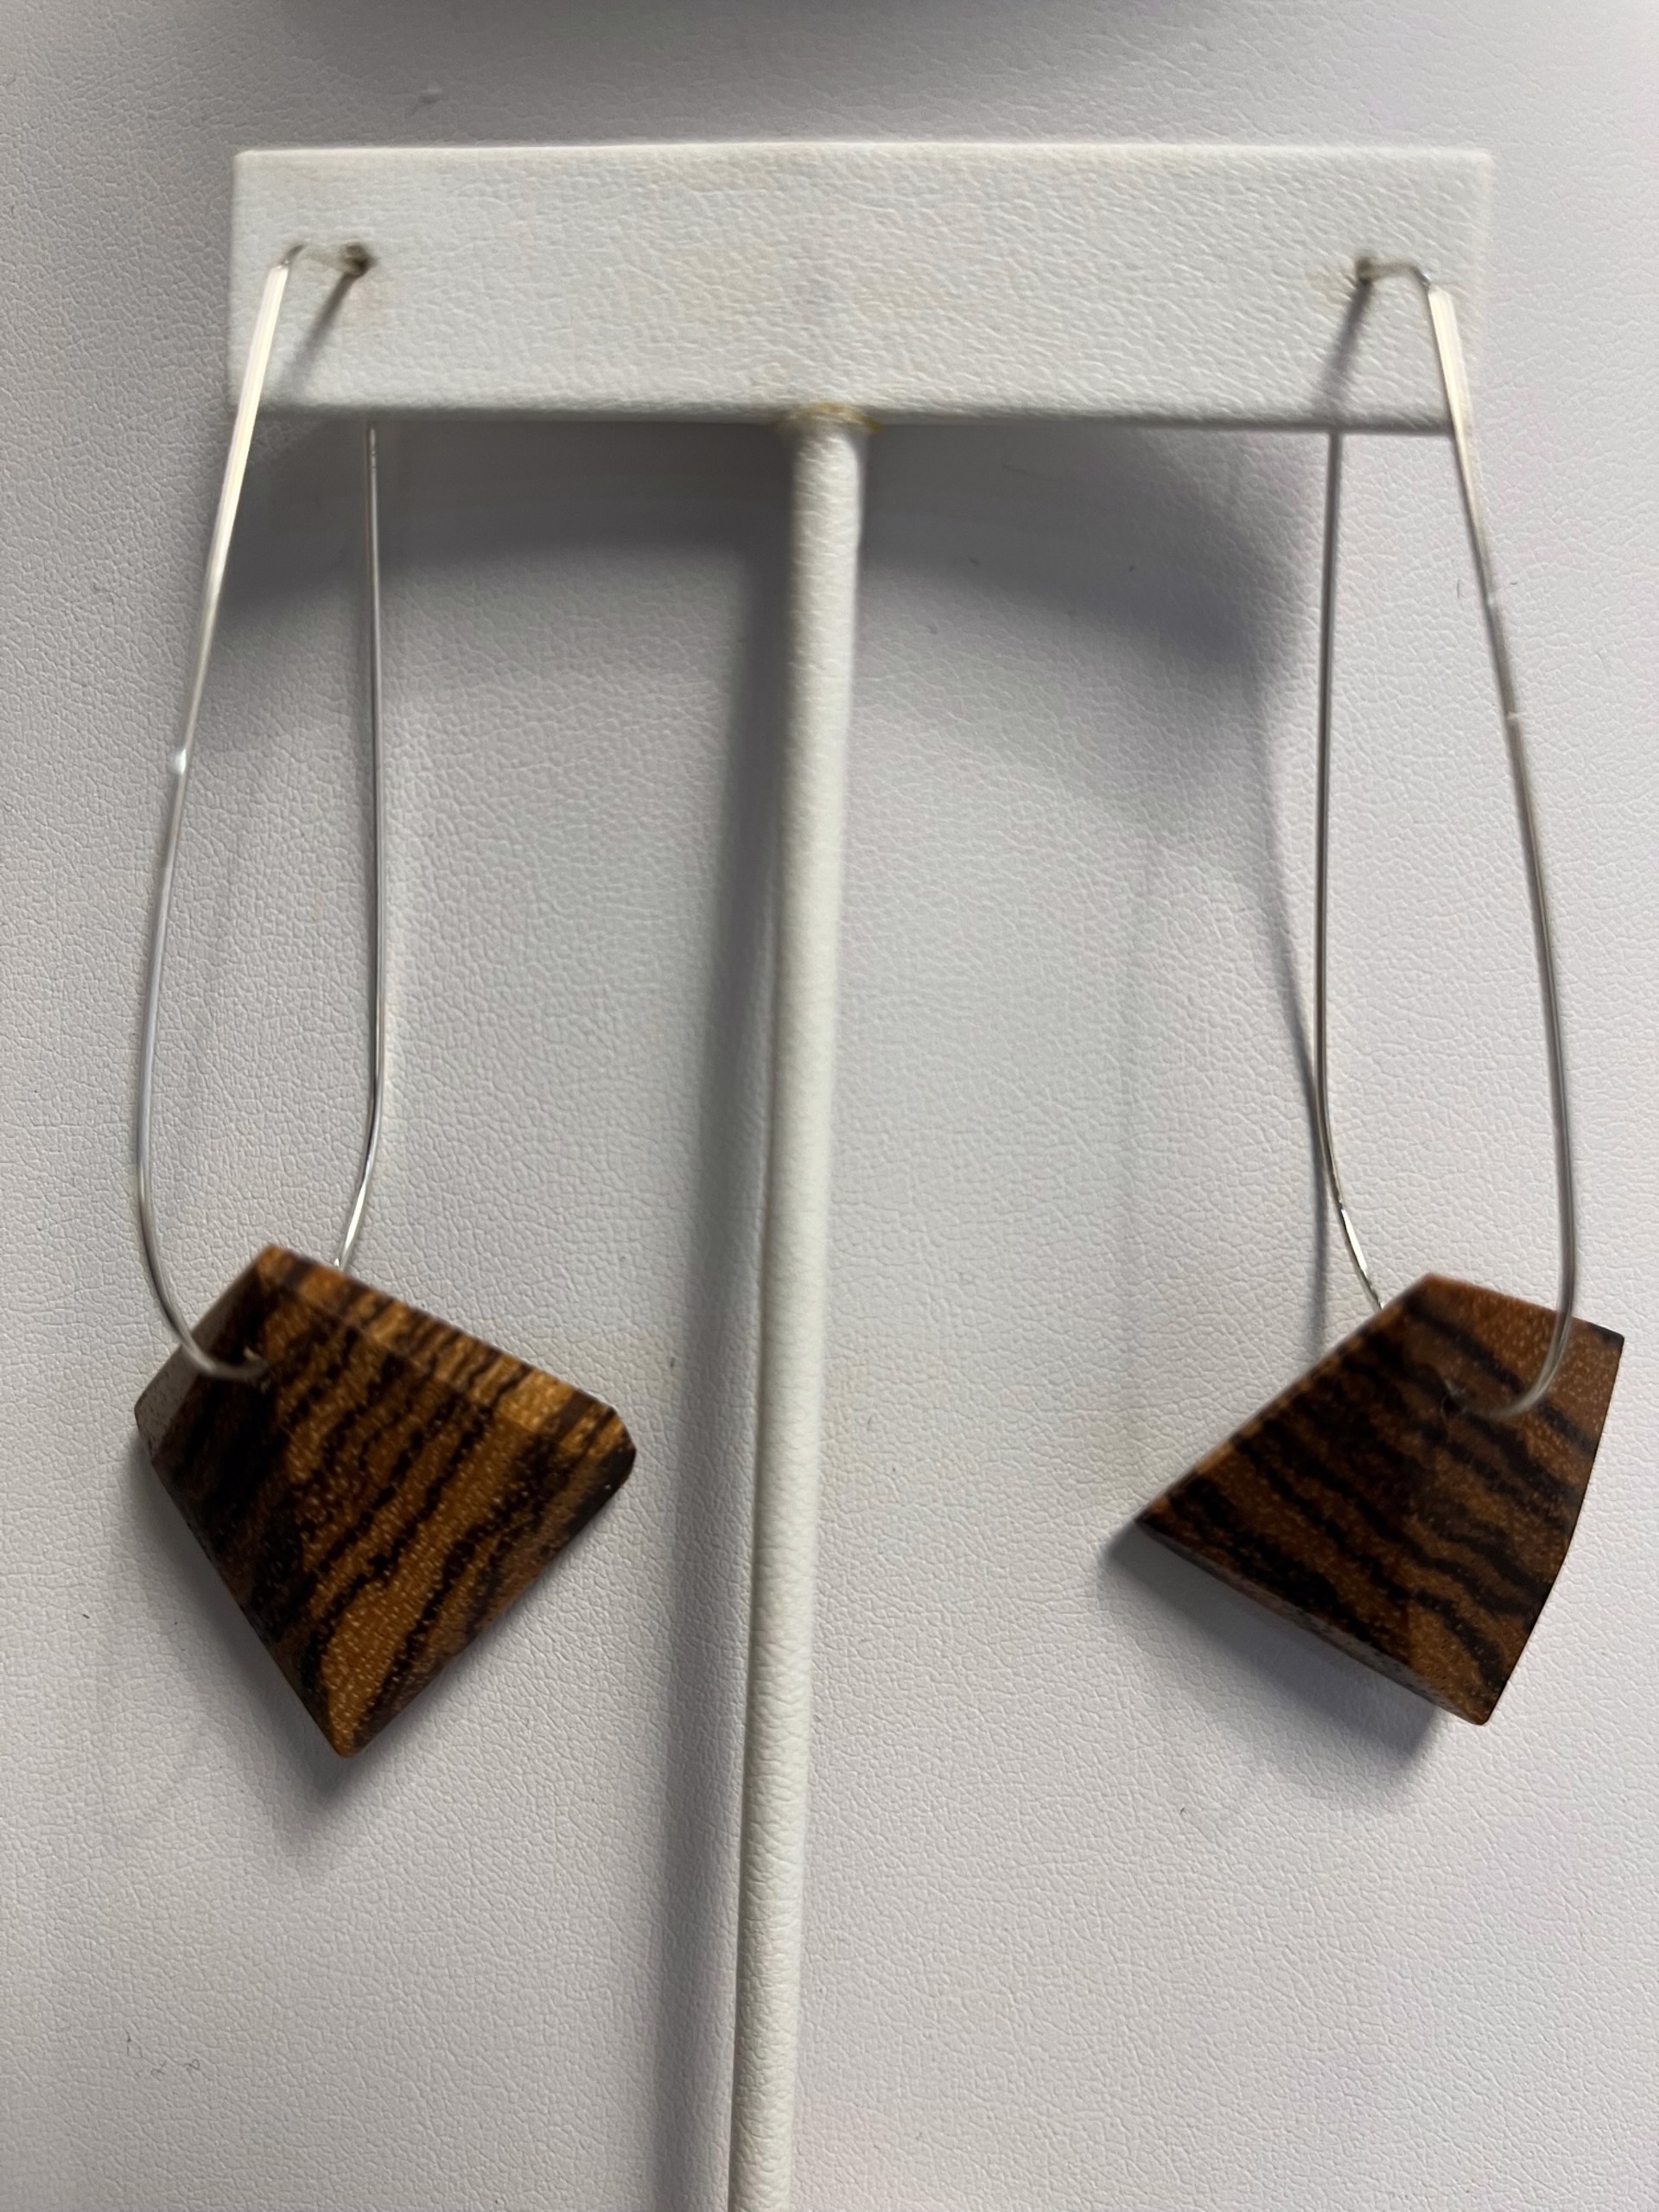 Zebra Wood with Large Sterling Silver Hoops by Summer Merritt